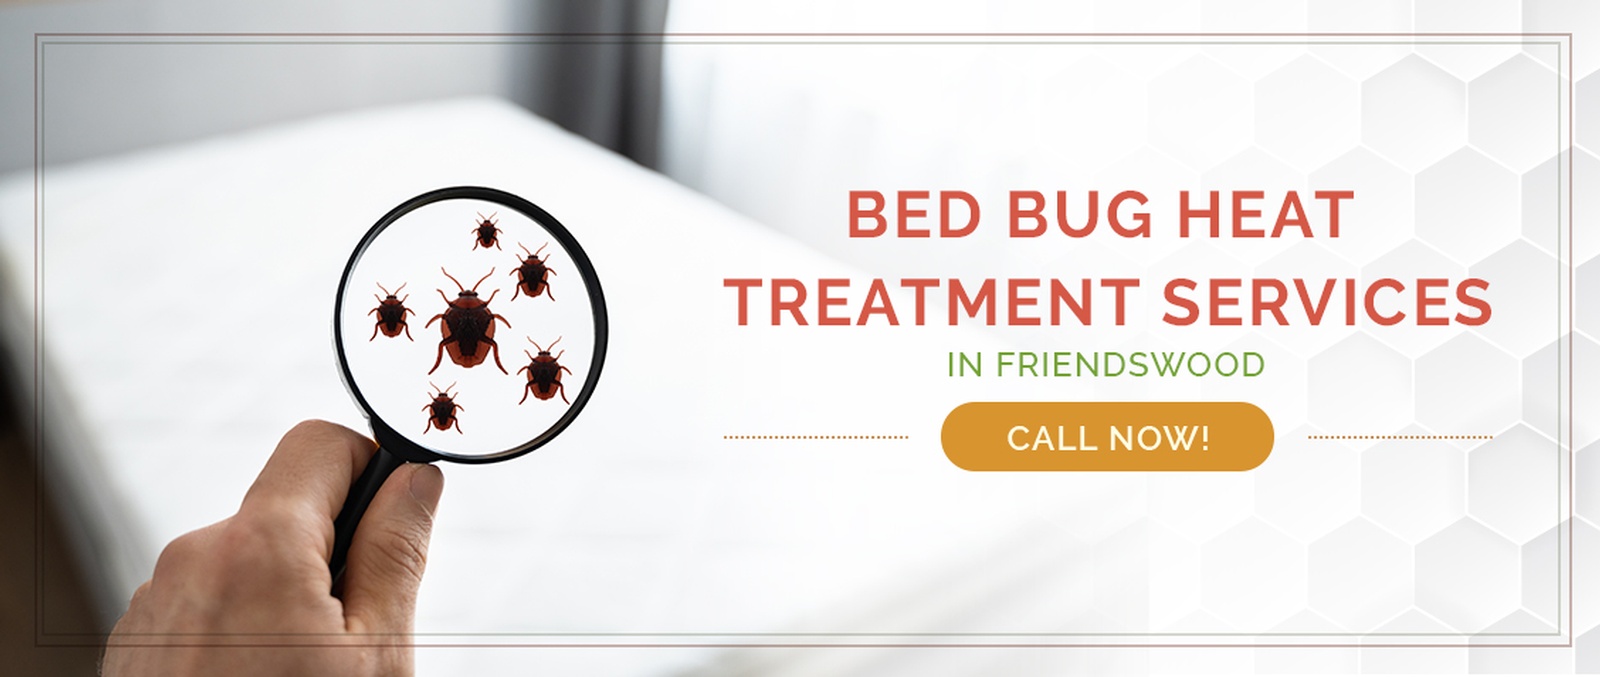 Friendswood Bed Bug Treatment / Heater Rental Services by Houston Bed Bug Heaters